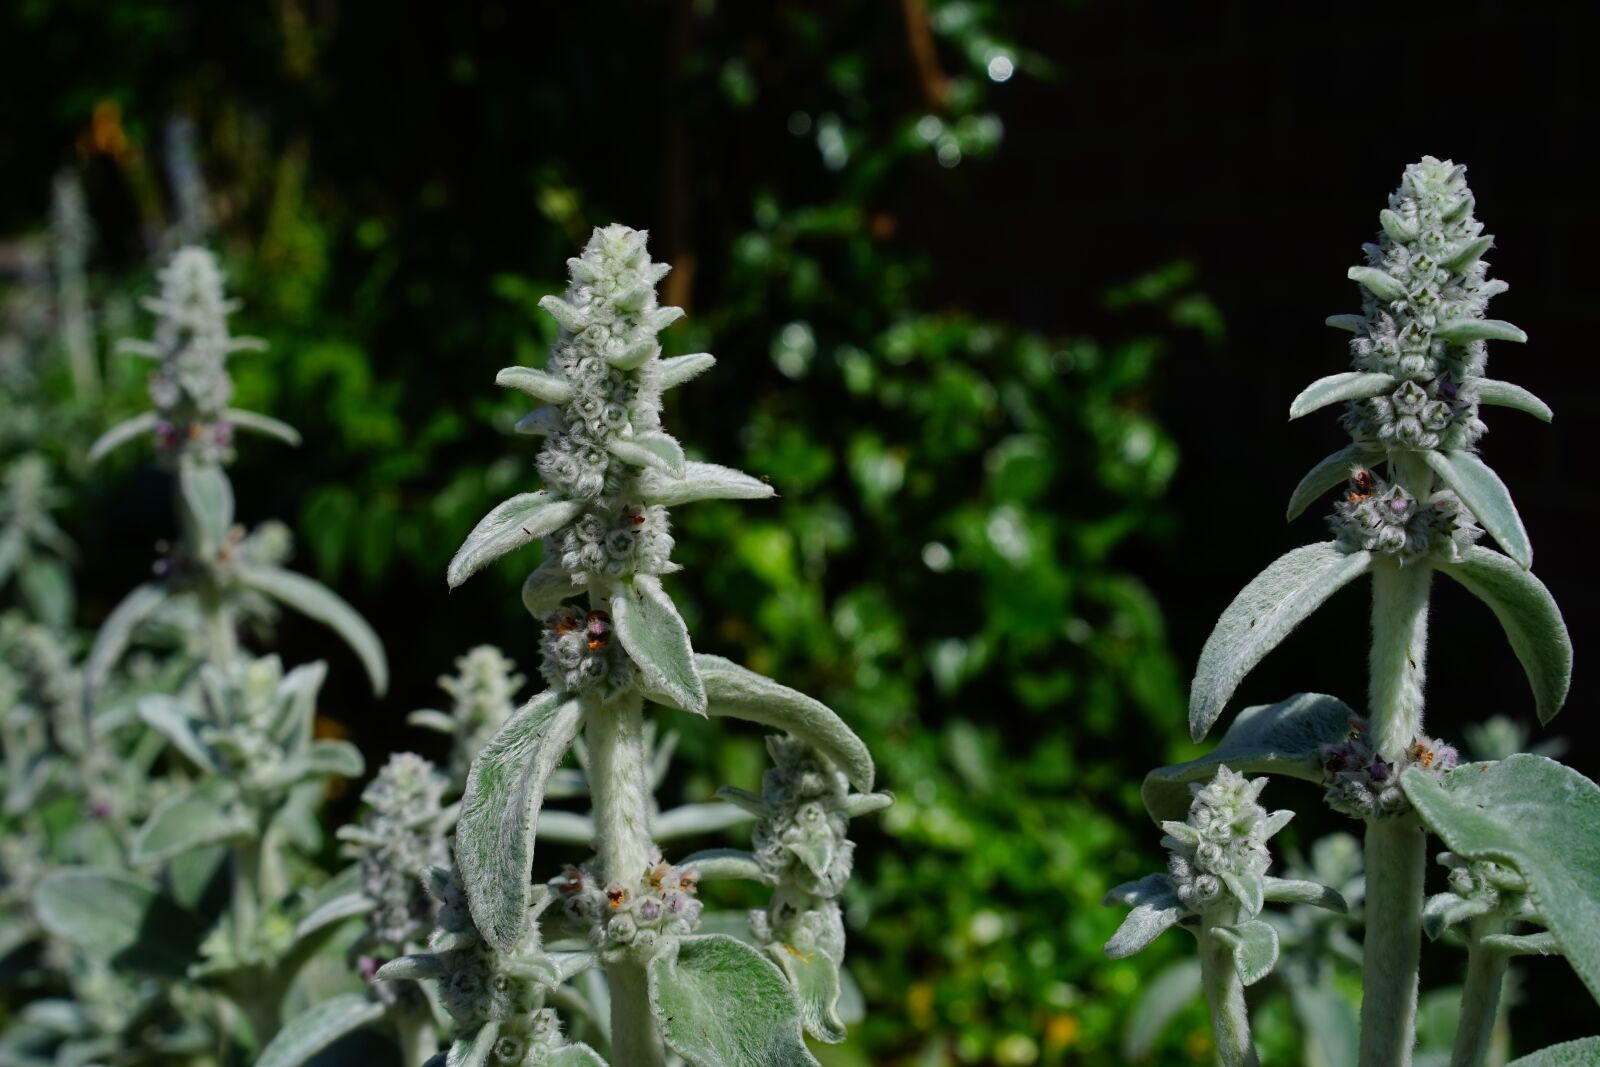 Sony a7 sample photo. Stachys wool, stachys, flowers photography